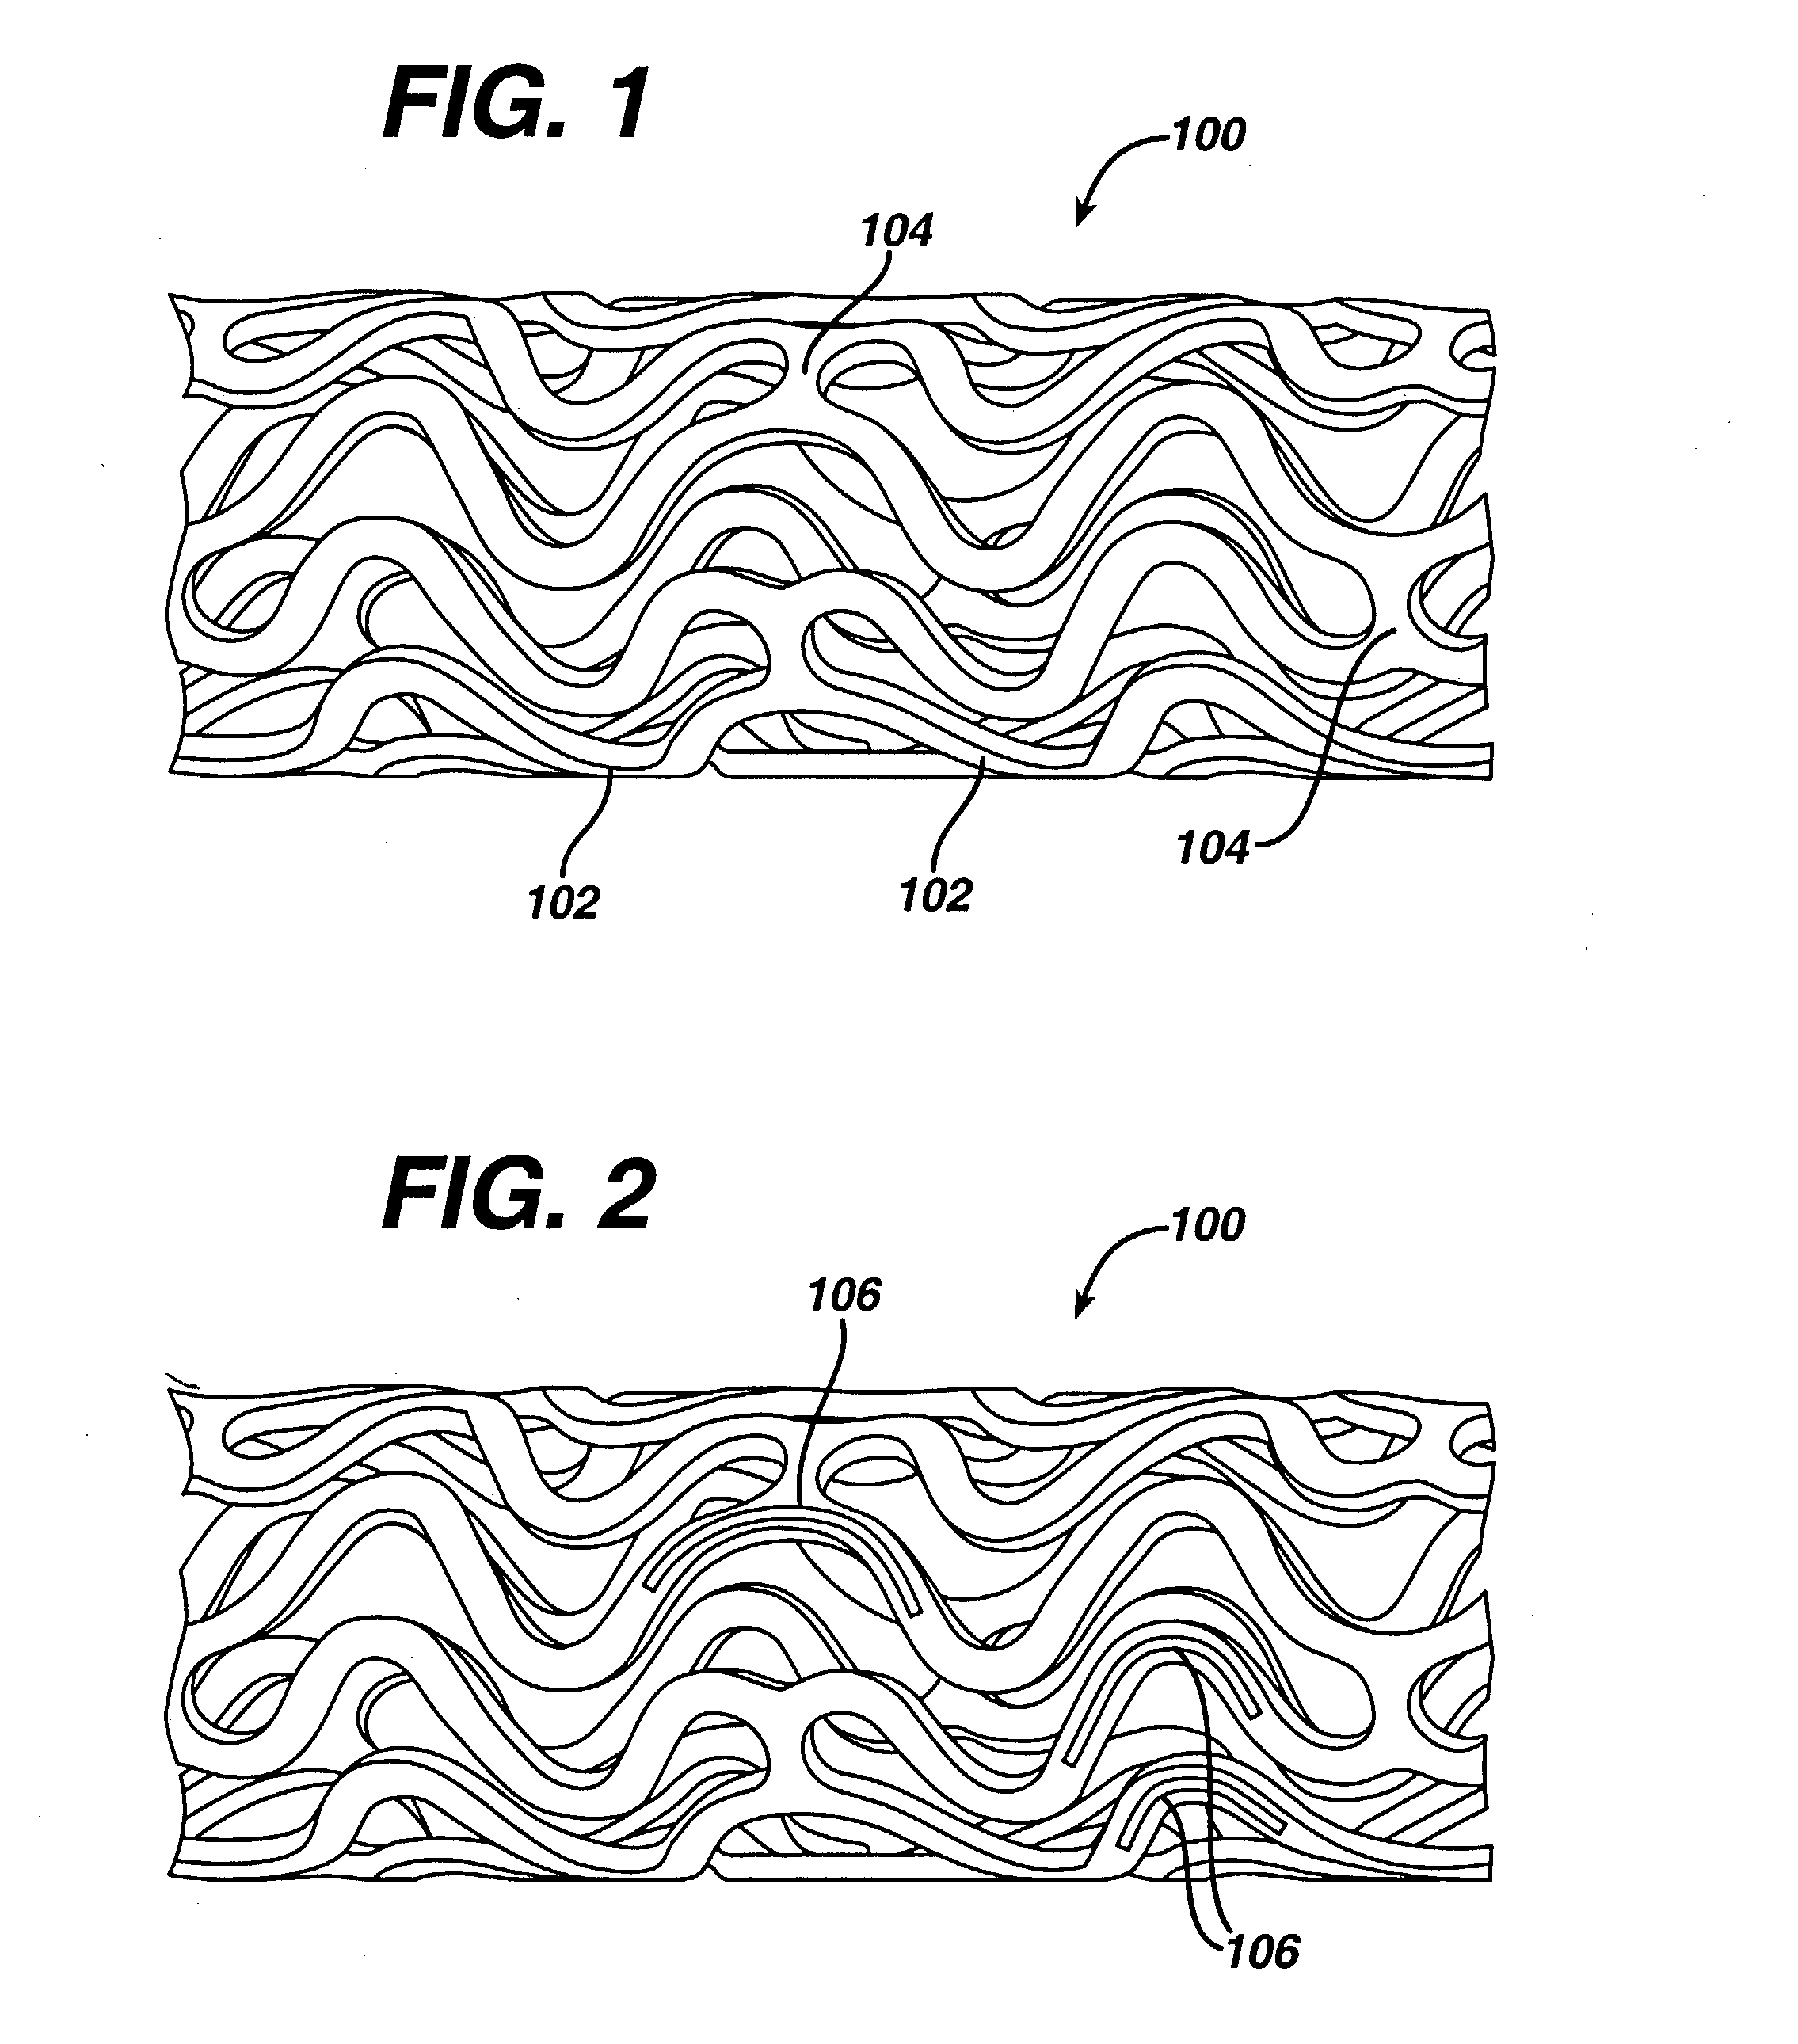 Drug releasing anastomosis devices and methods for treating anastomotic sites